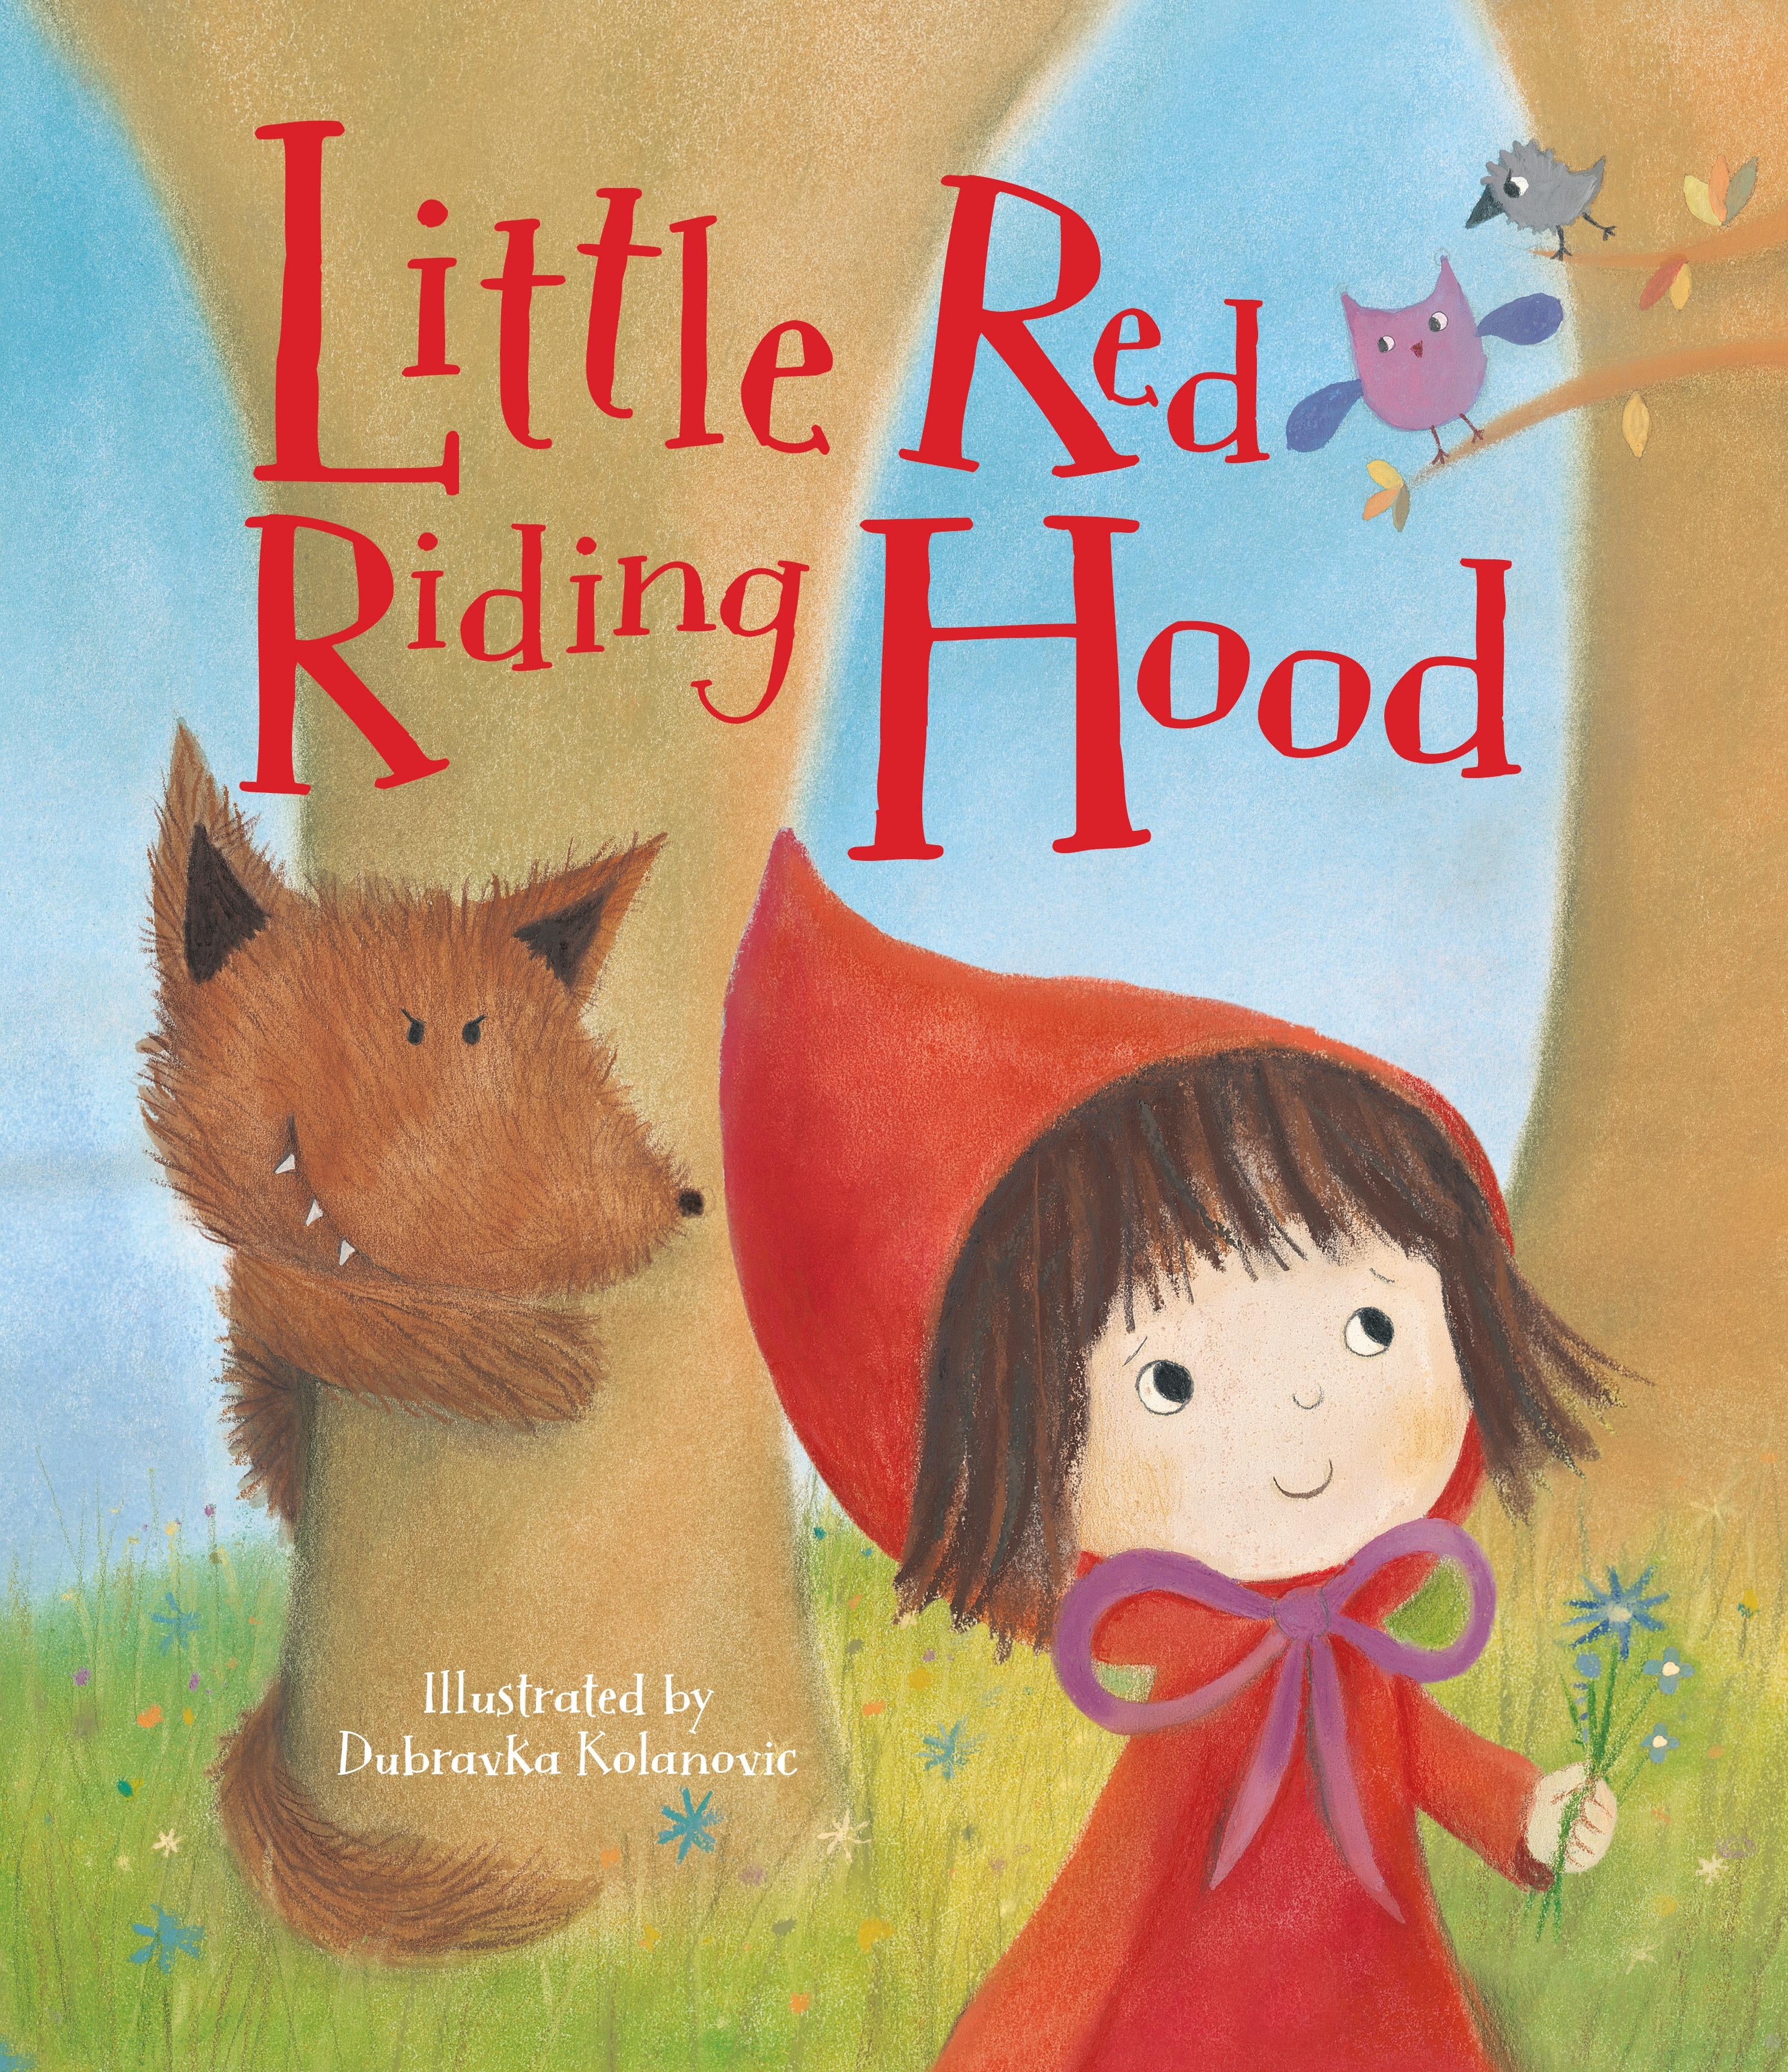 book review little red riding hood